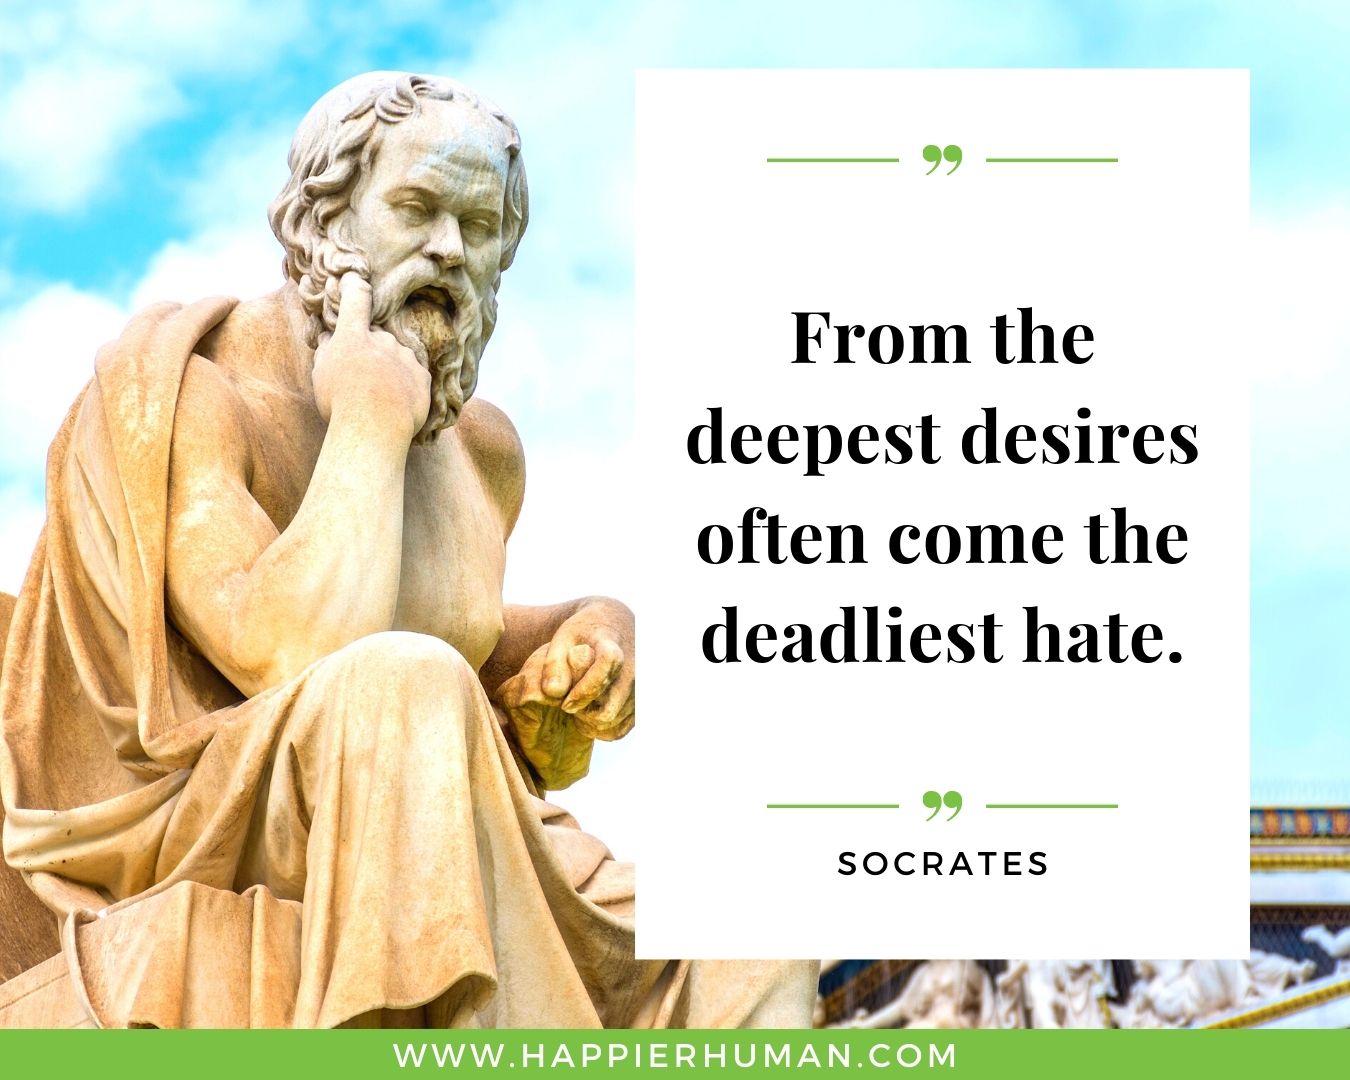 Haters Quotes - “From the deepest desires often come the deadliest hate.” - Socrates